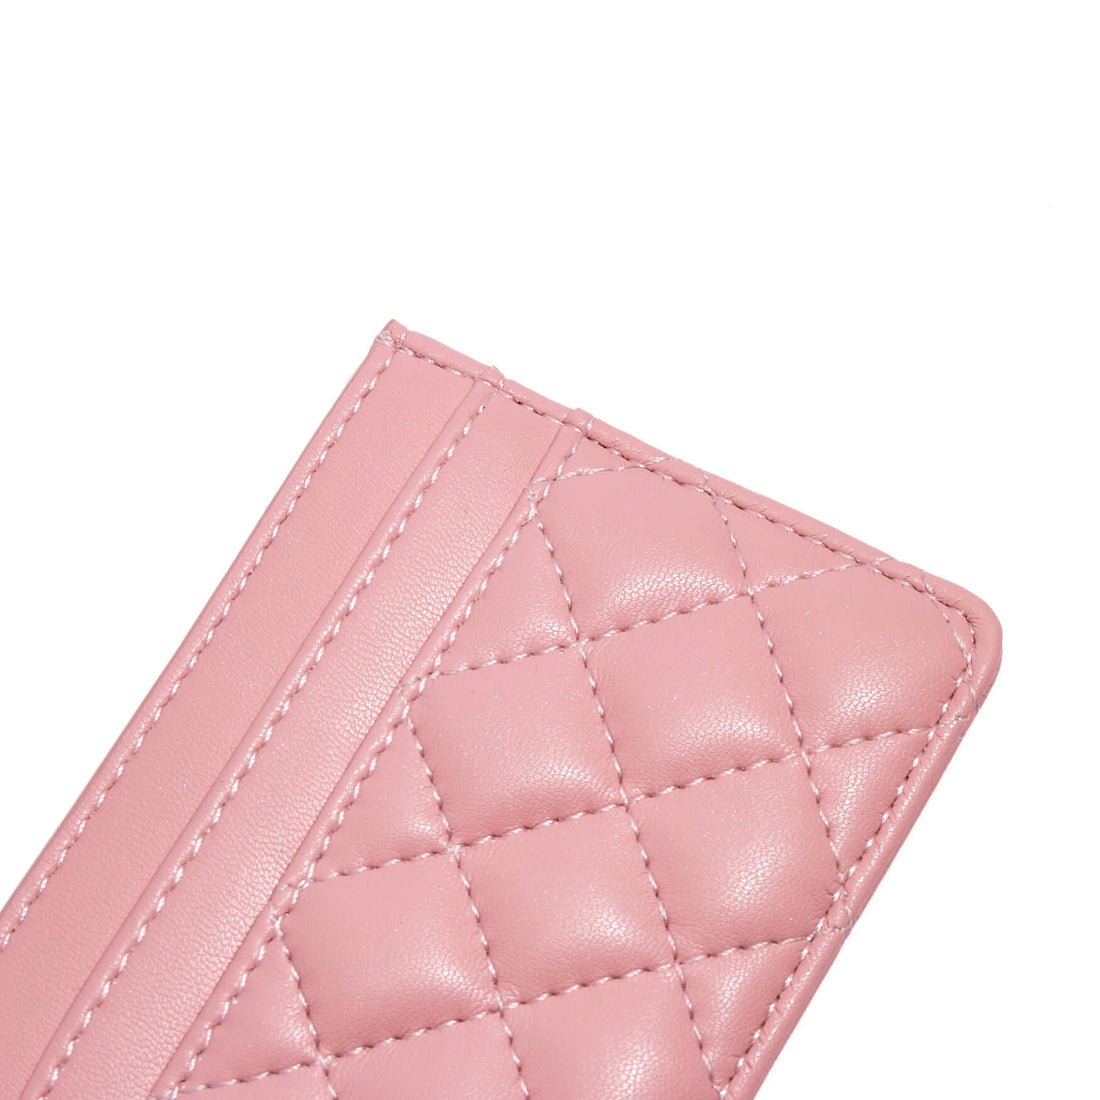 SINBONO Luxury Business Card Case Holder Pink - Cruelty Free Leather Purse